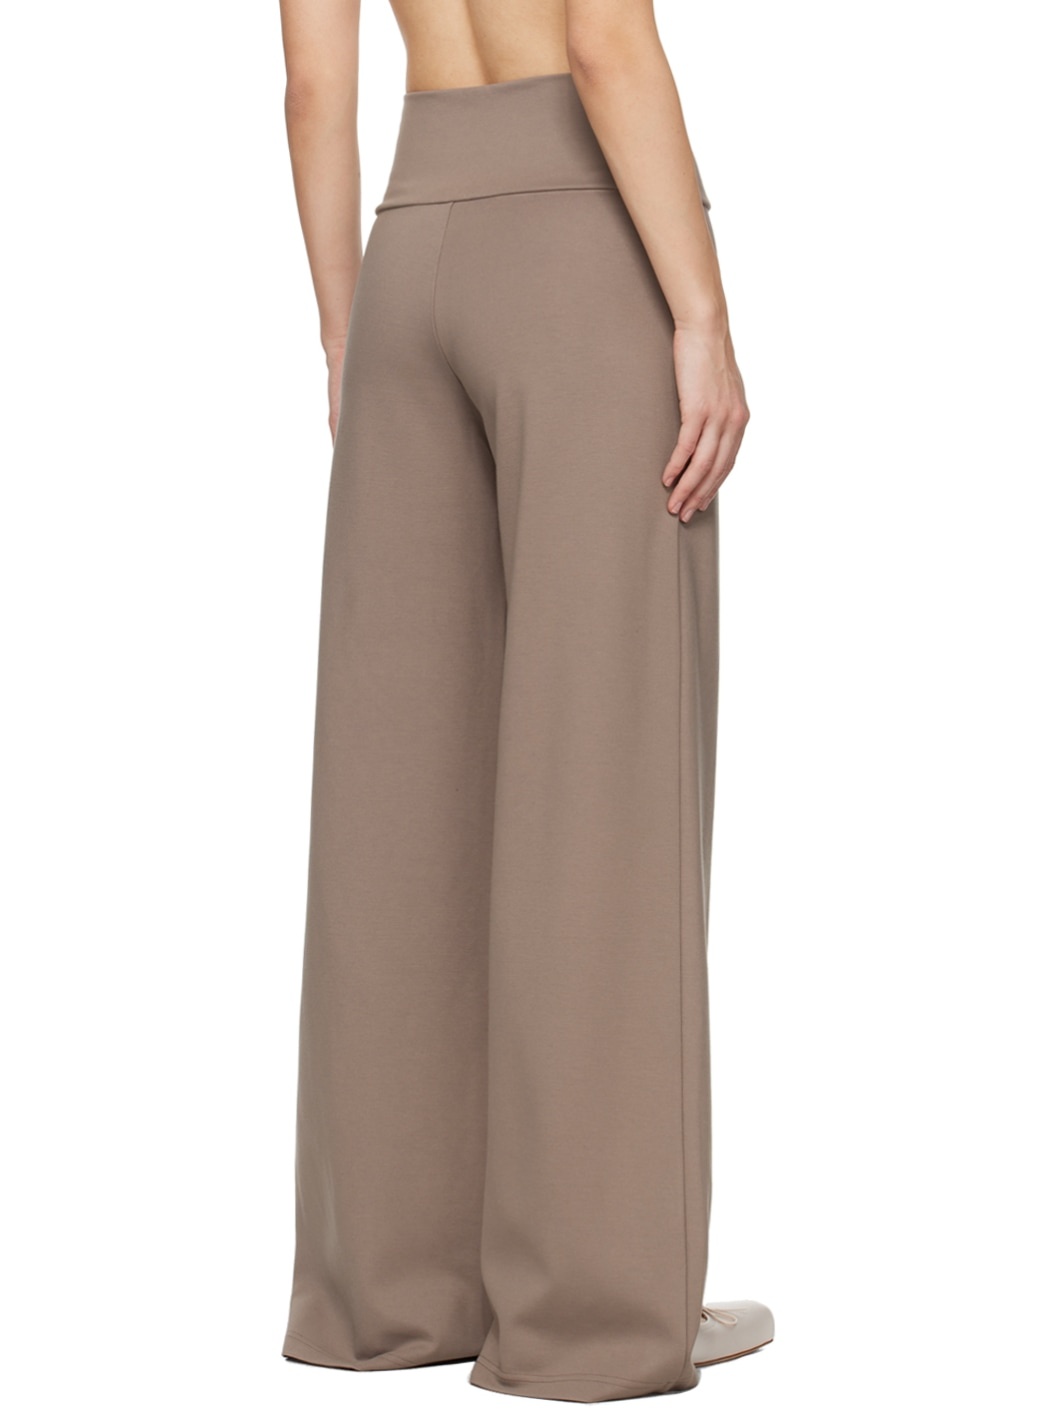 SSENSE Exclusive Taupe 'Elemental by Paris Georgia' Everyday Lounge Pants - 3